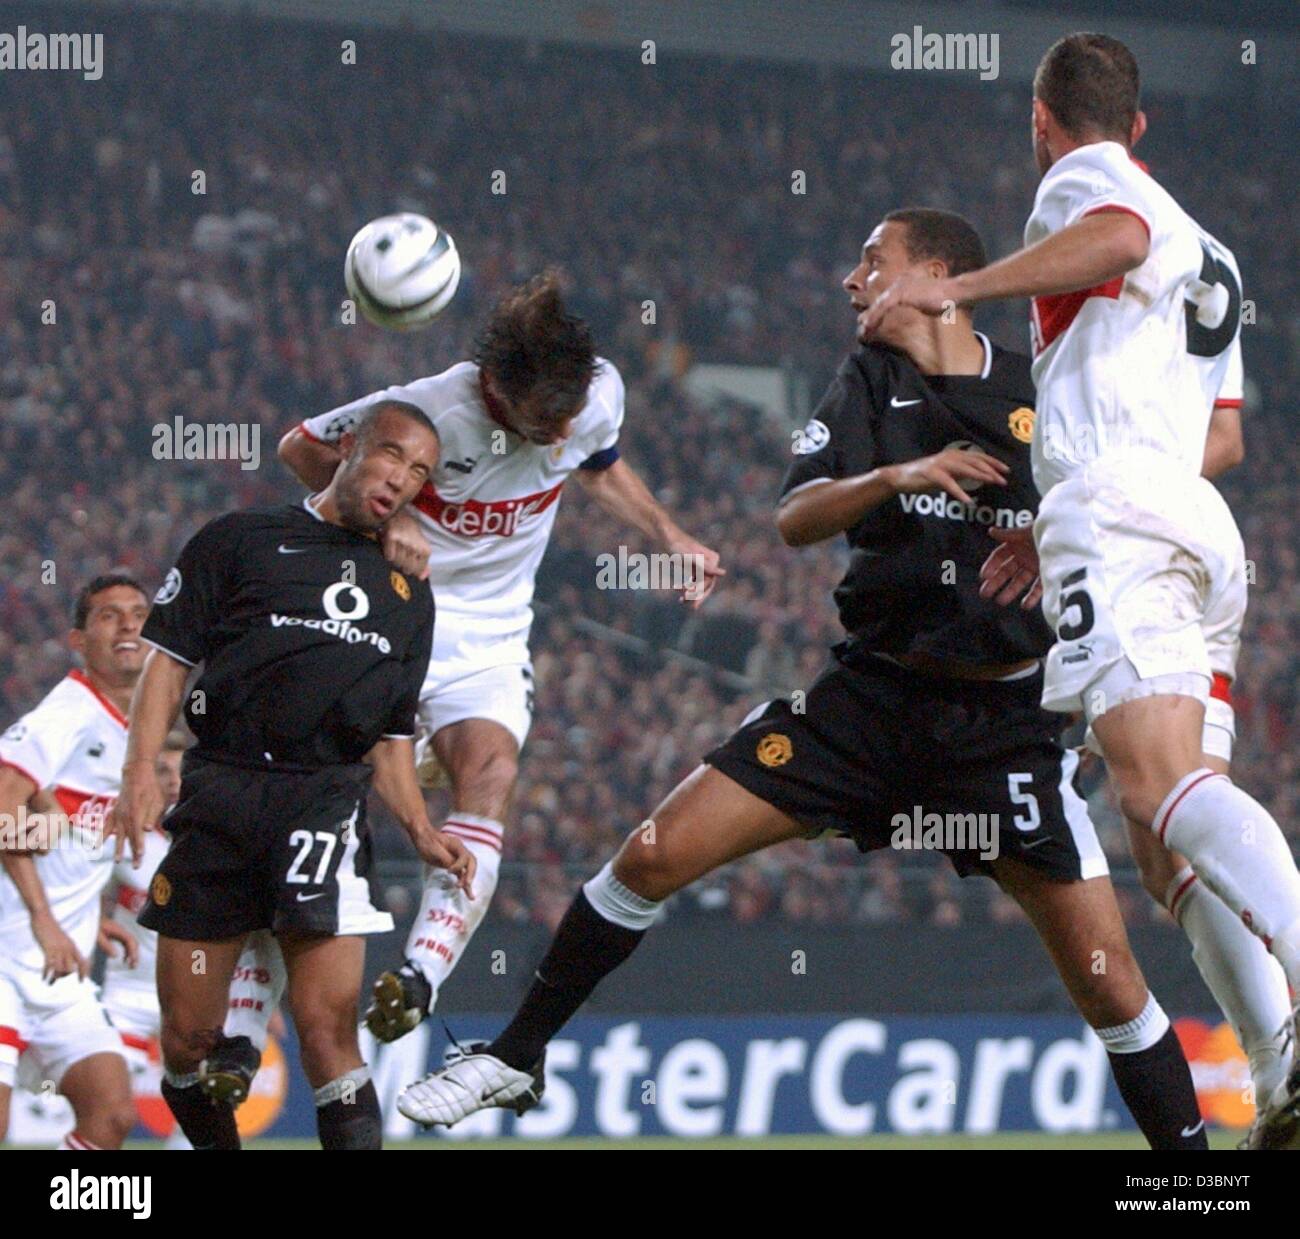 (dpa) - Stuttgart's Croatian midfielder Zvonimir Soldo (2nd from L) in a heading duel with Manchester's French defender Mikael Silvestre (L) during the second group game of the European soccer Champions League opposing VfB Stuttgart and Manchester United in Stuttgart, Germany, 1 October 2003. Stuttg Stock Photo